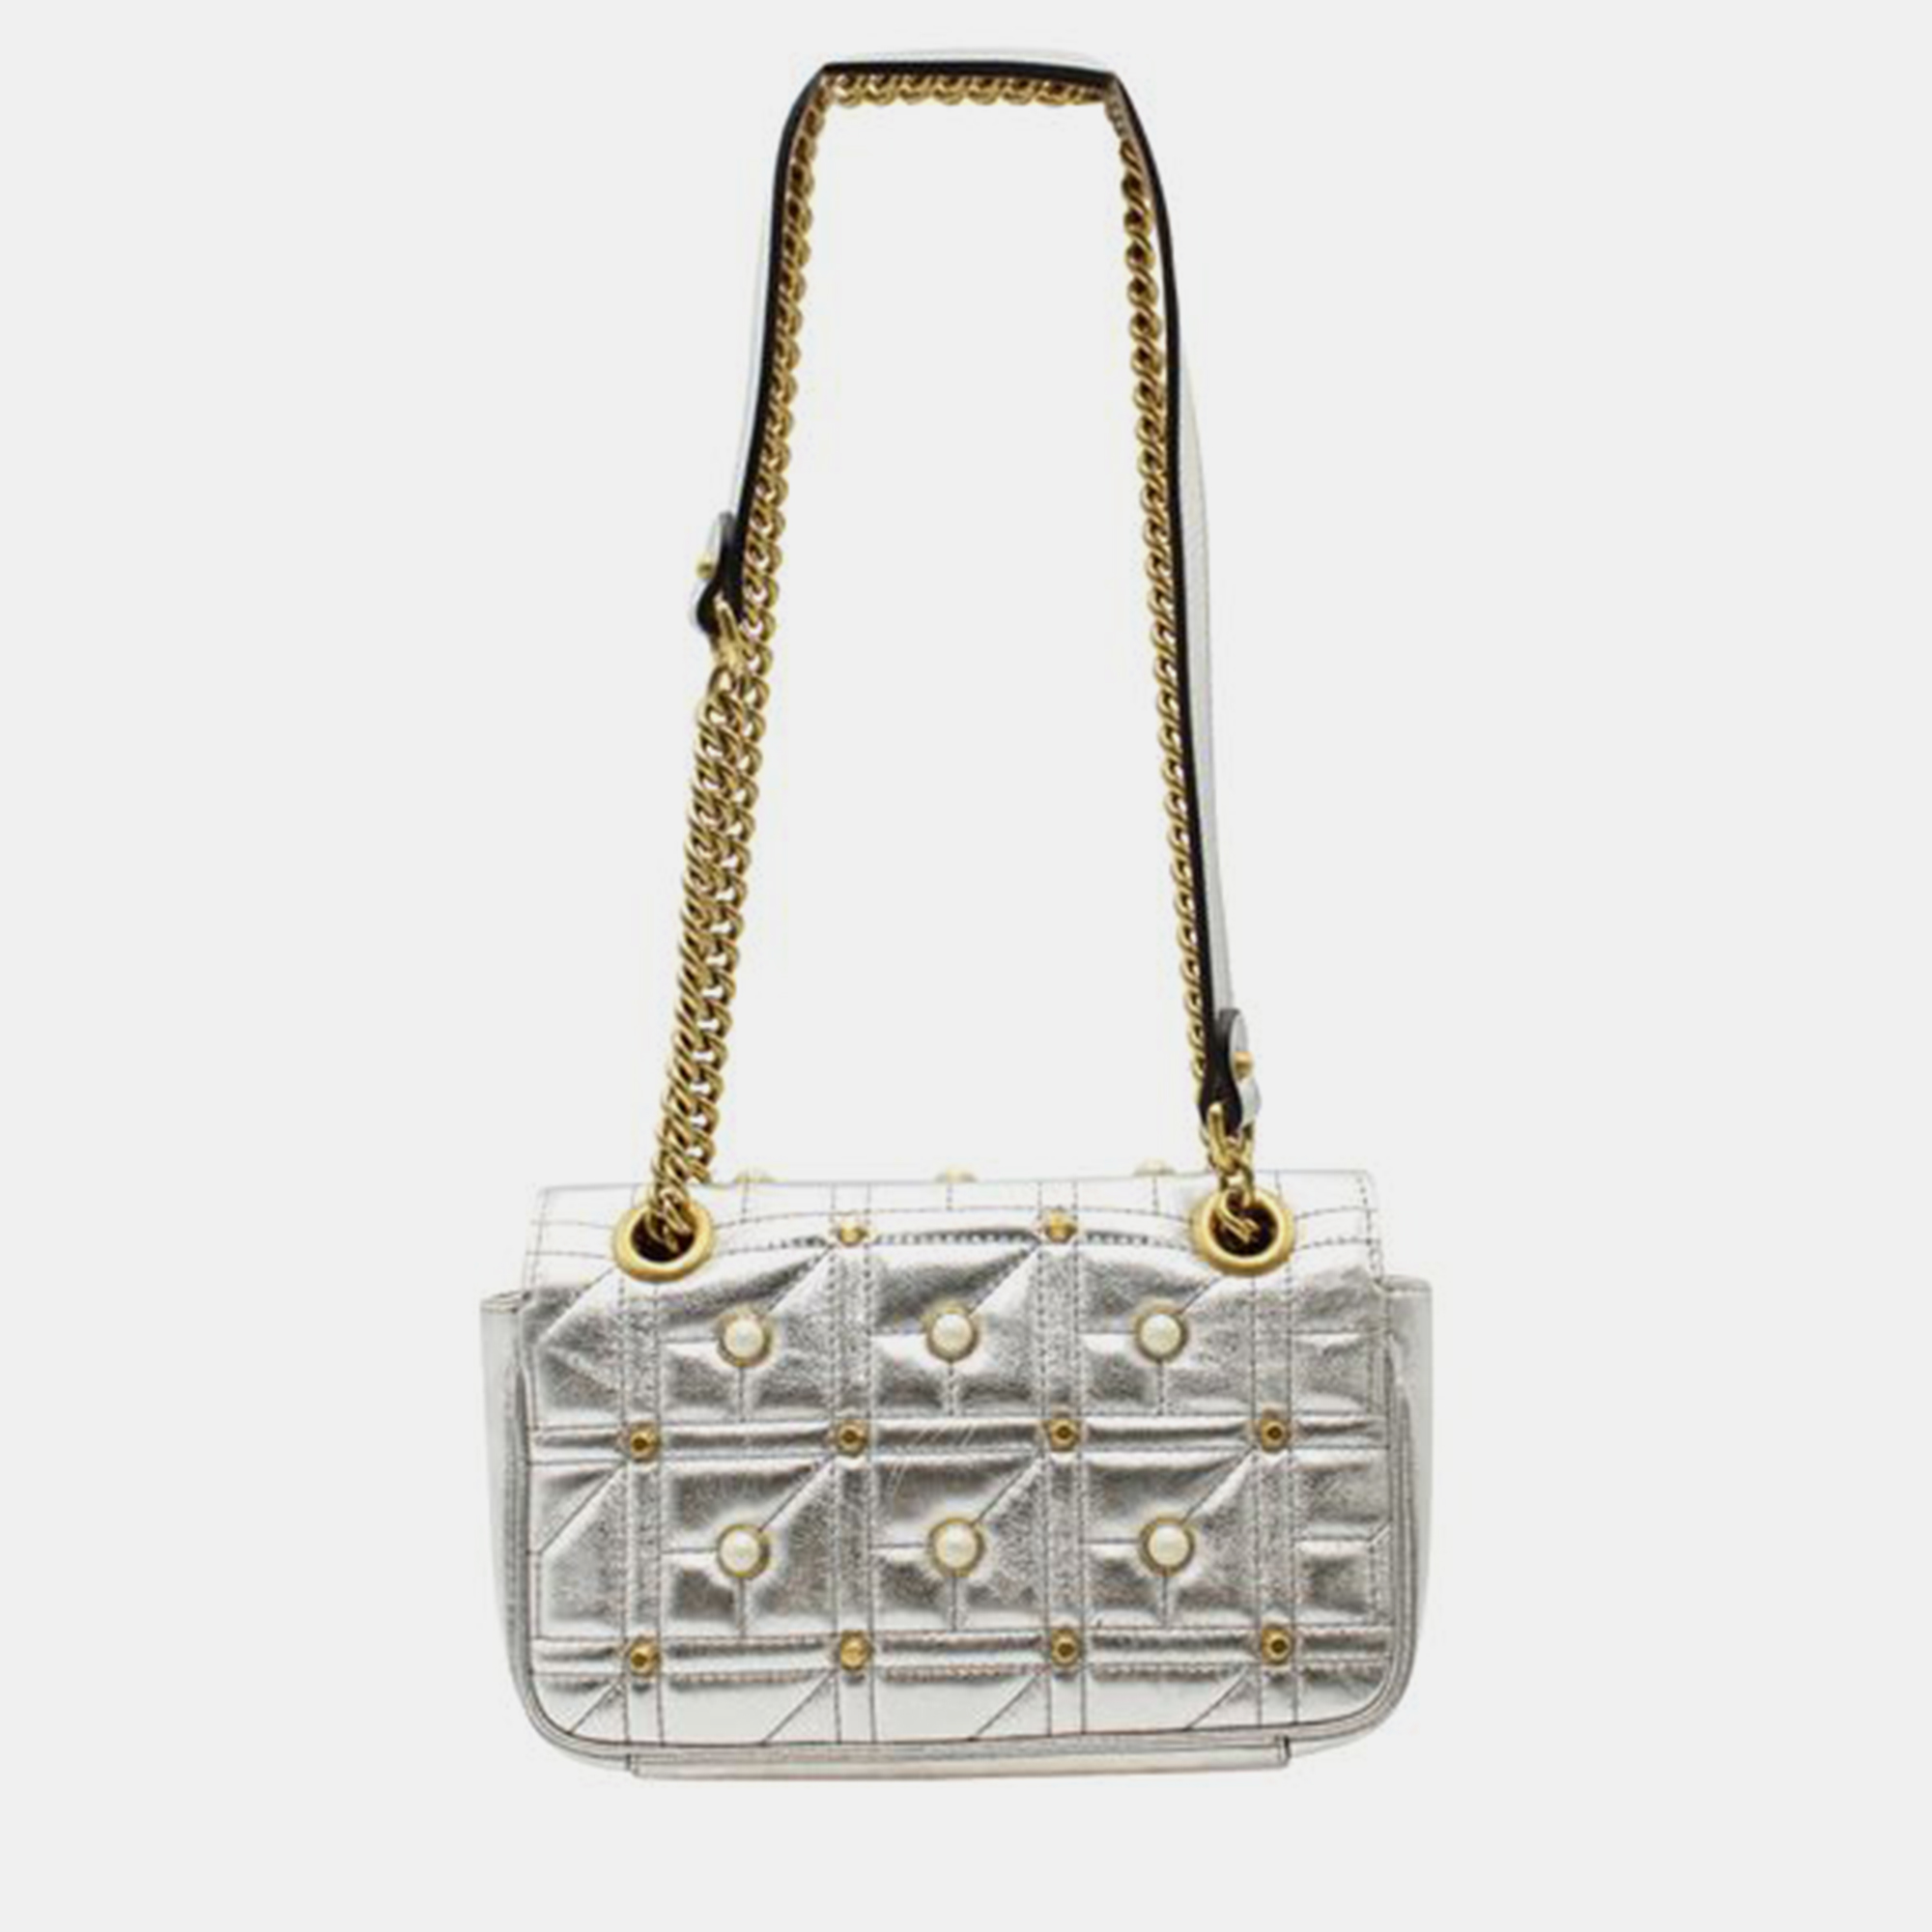 GUCCI Pearly GG Marmont Mini Flap Bag Embellished Matelasse Leather SHOULDER BAGS